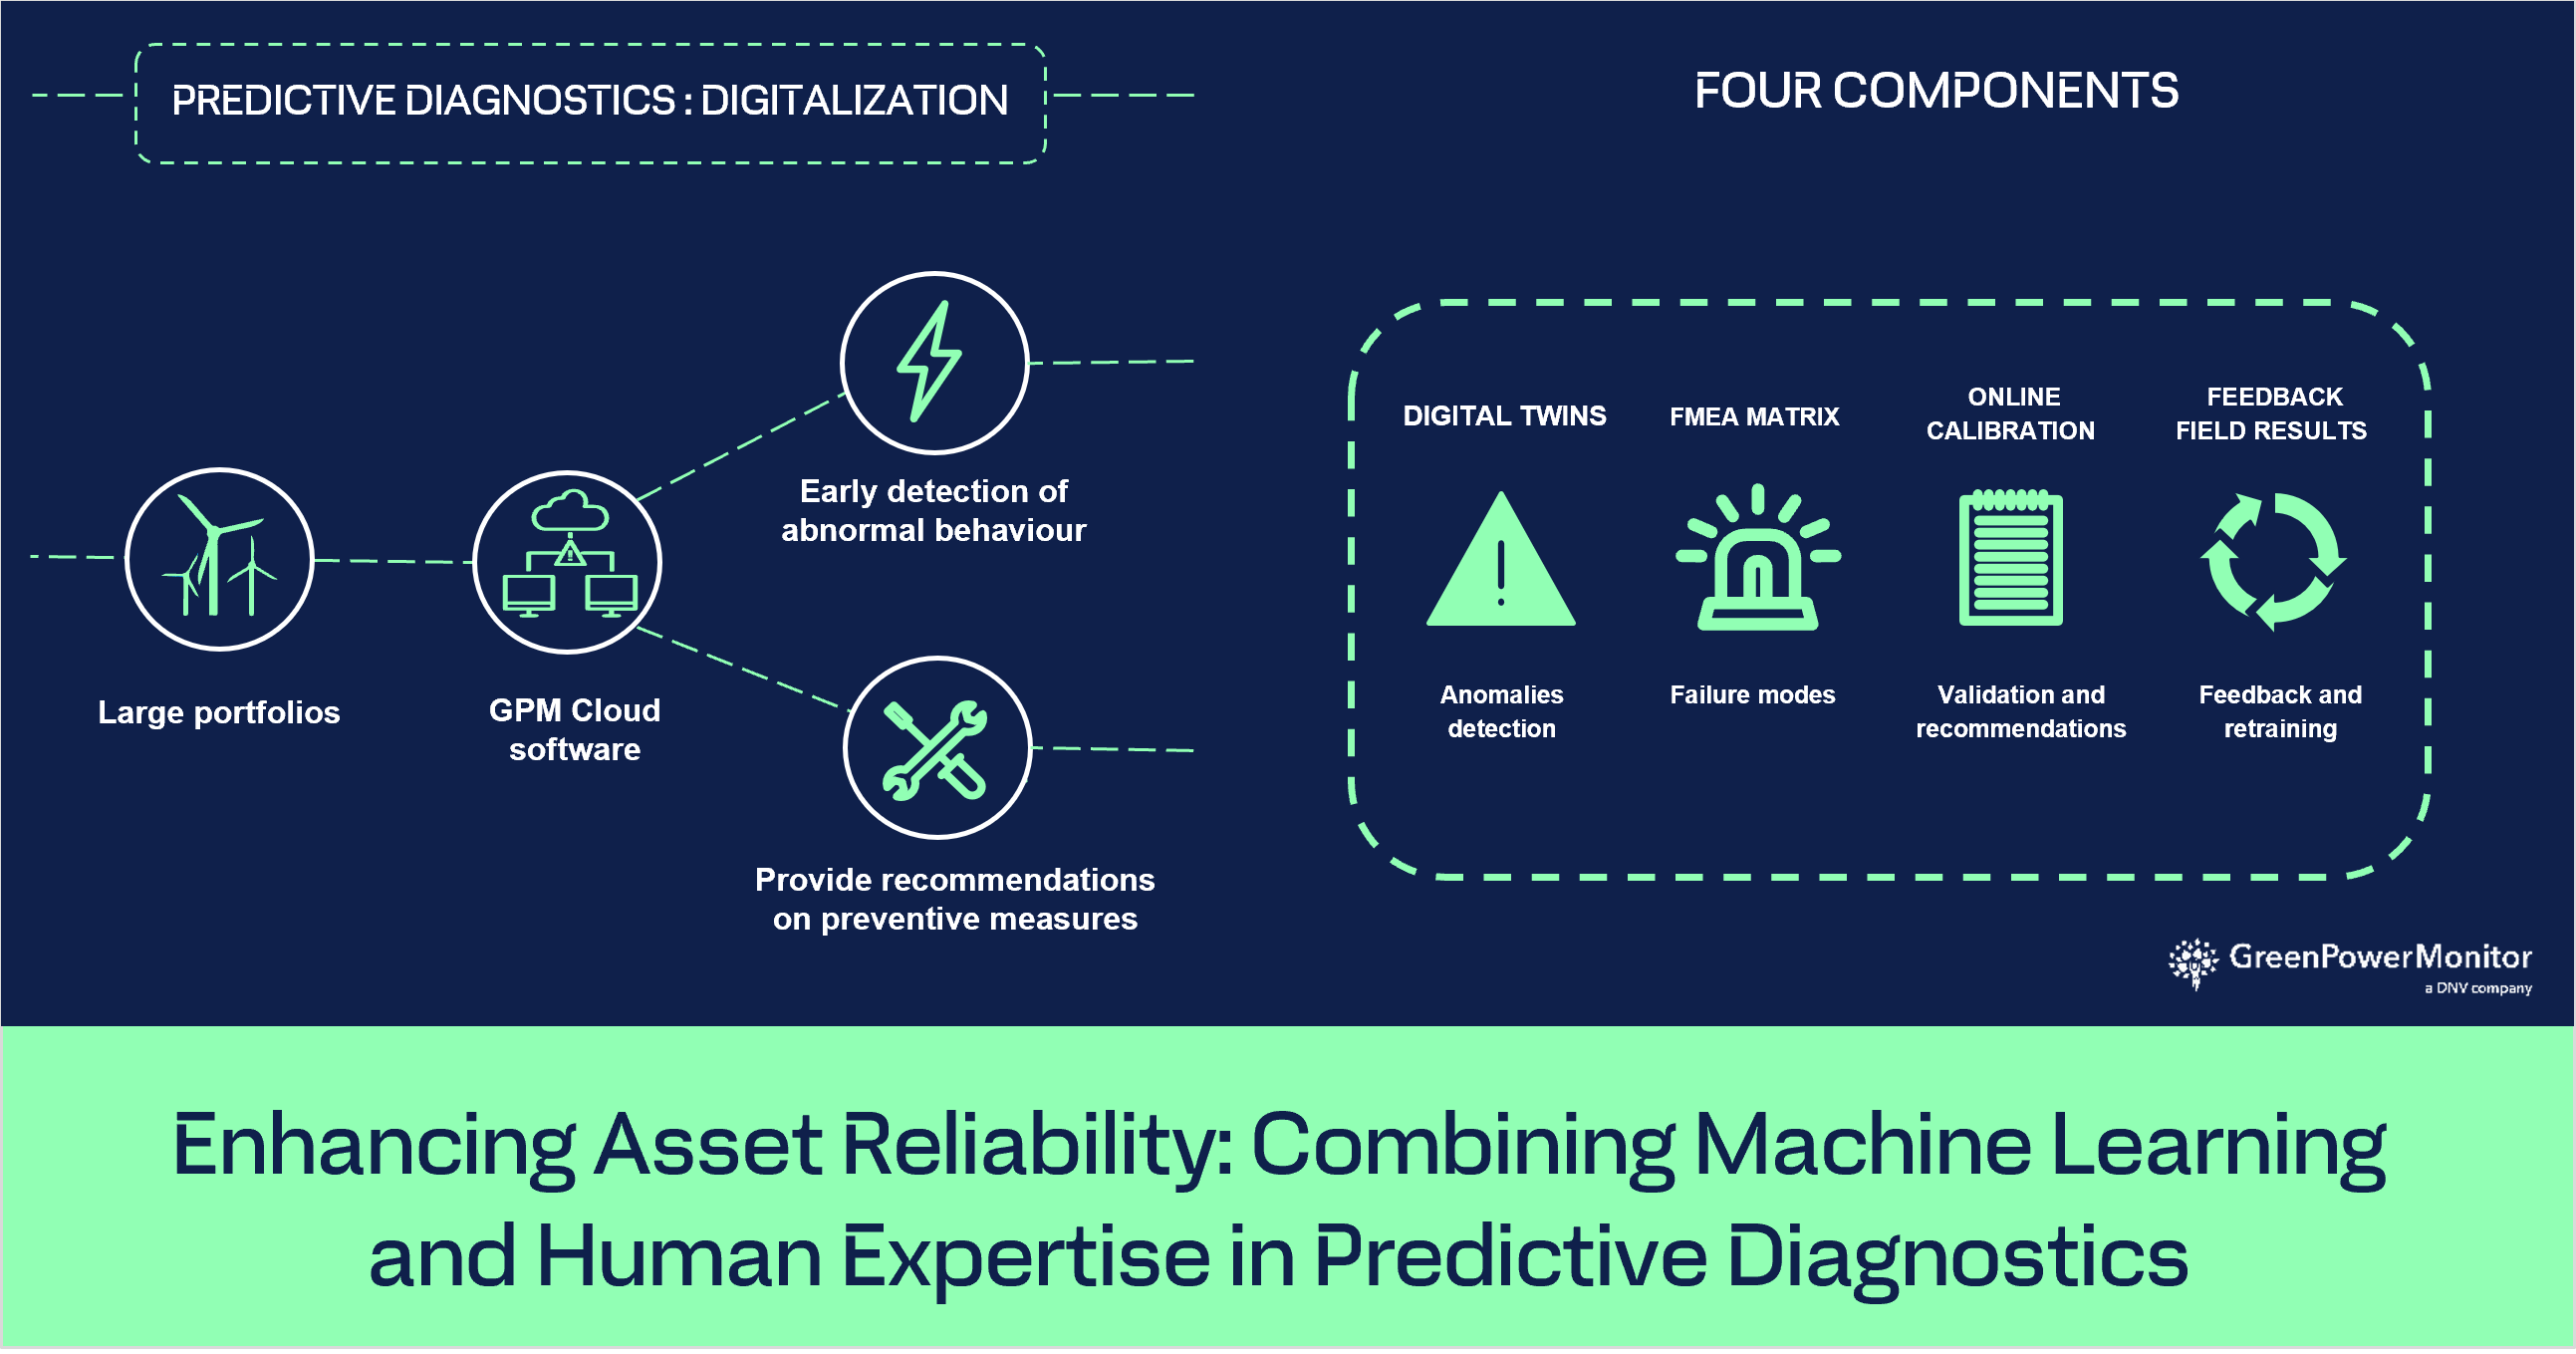 Enhancing Asset Reliability: Combining Machine Learning and Human Expertise in Predictive Diagnostics